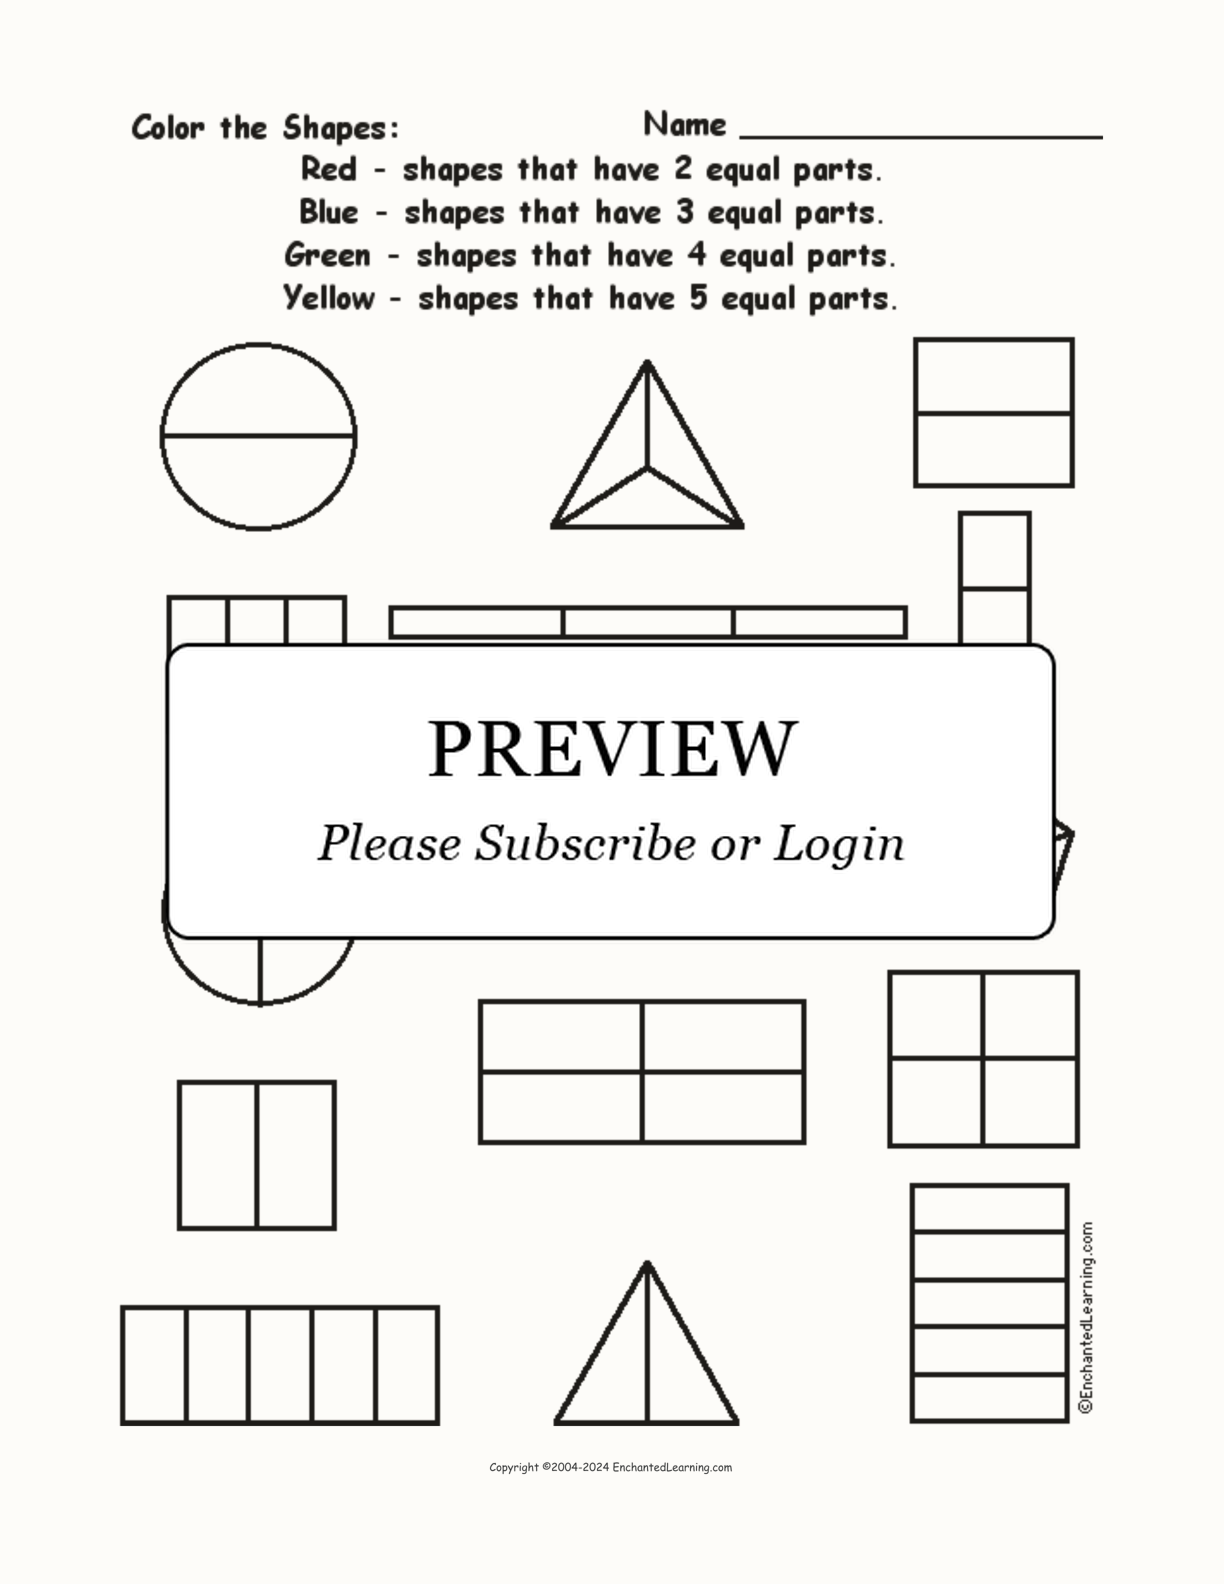 Color the Divided Shapes interactive worksheet page 1